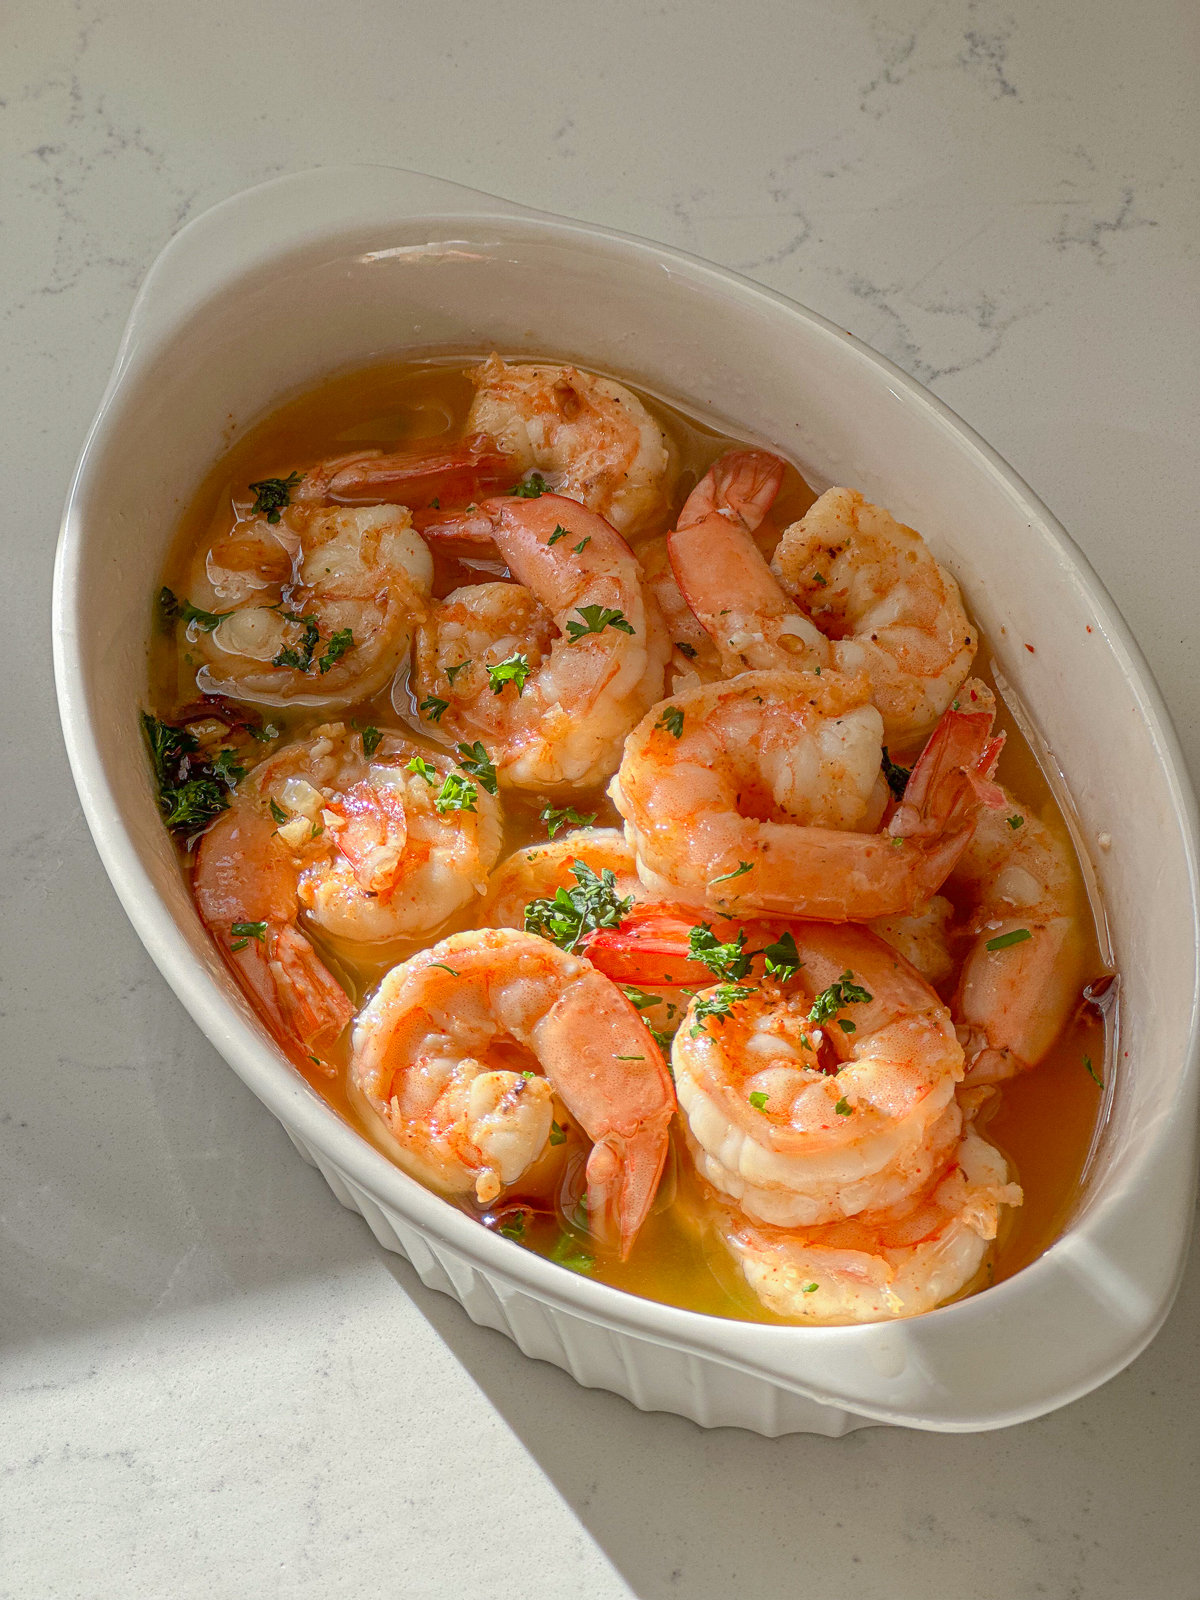 Shrimp with chopped parsley in olive oil.